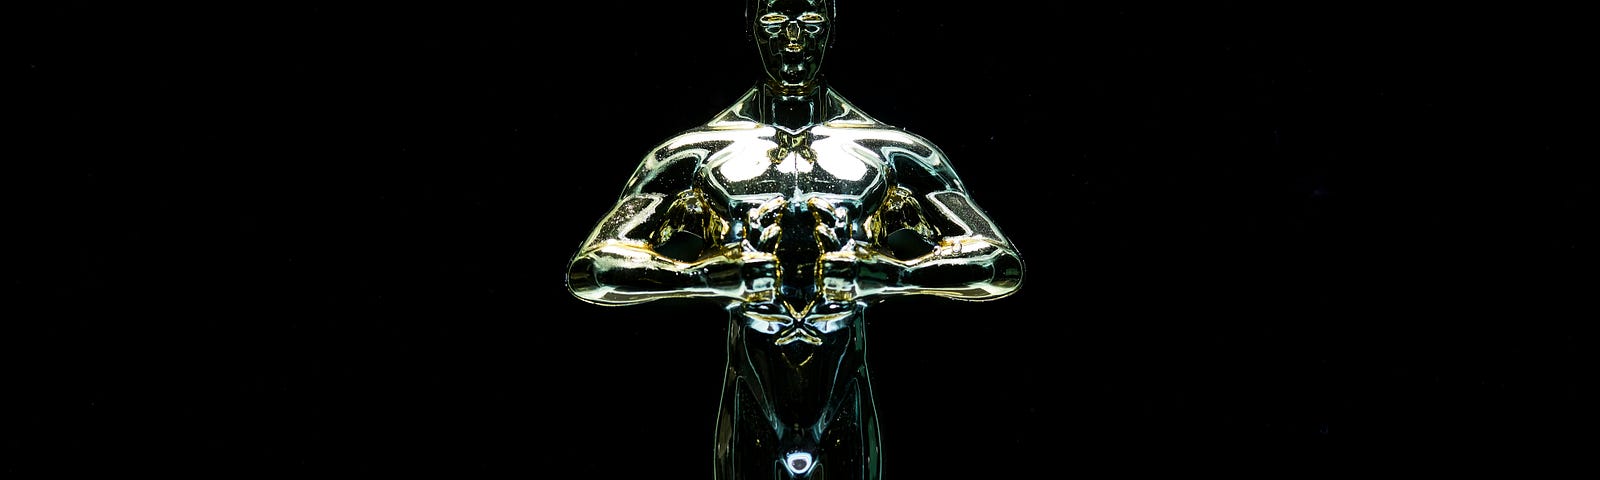 a black background and a perfect shot of the shiny, golden 96th Oscar statue in the middle also known as the Academy award